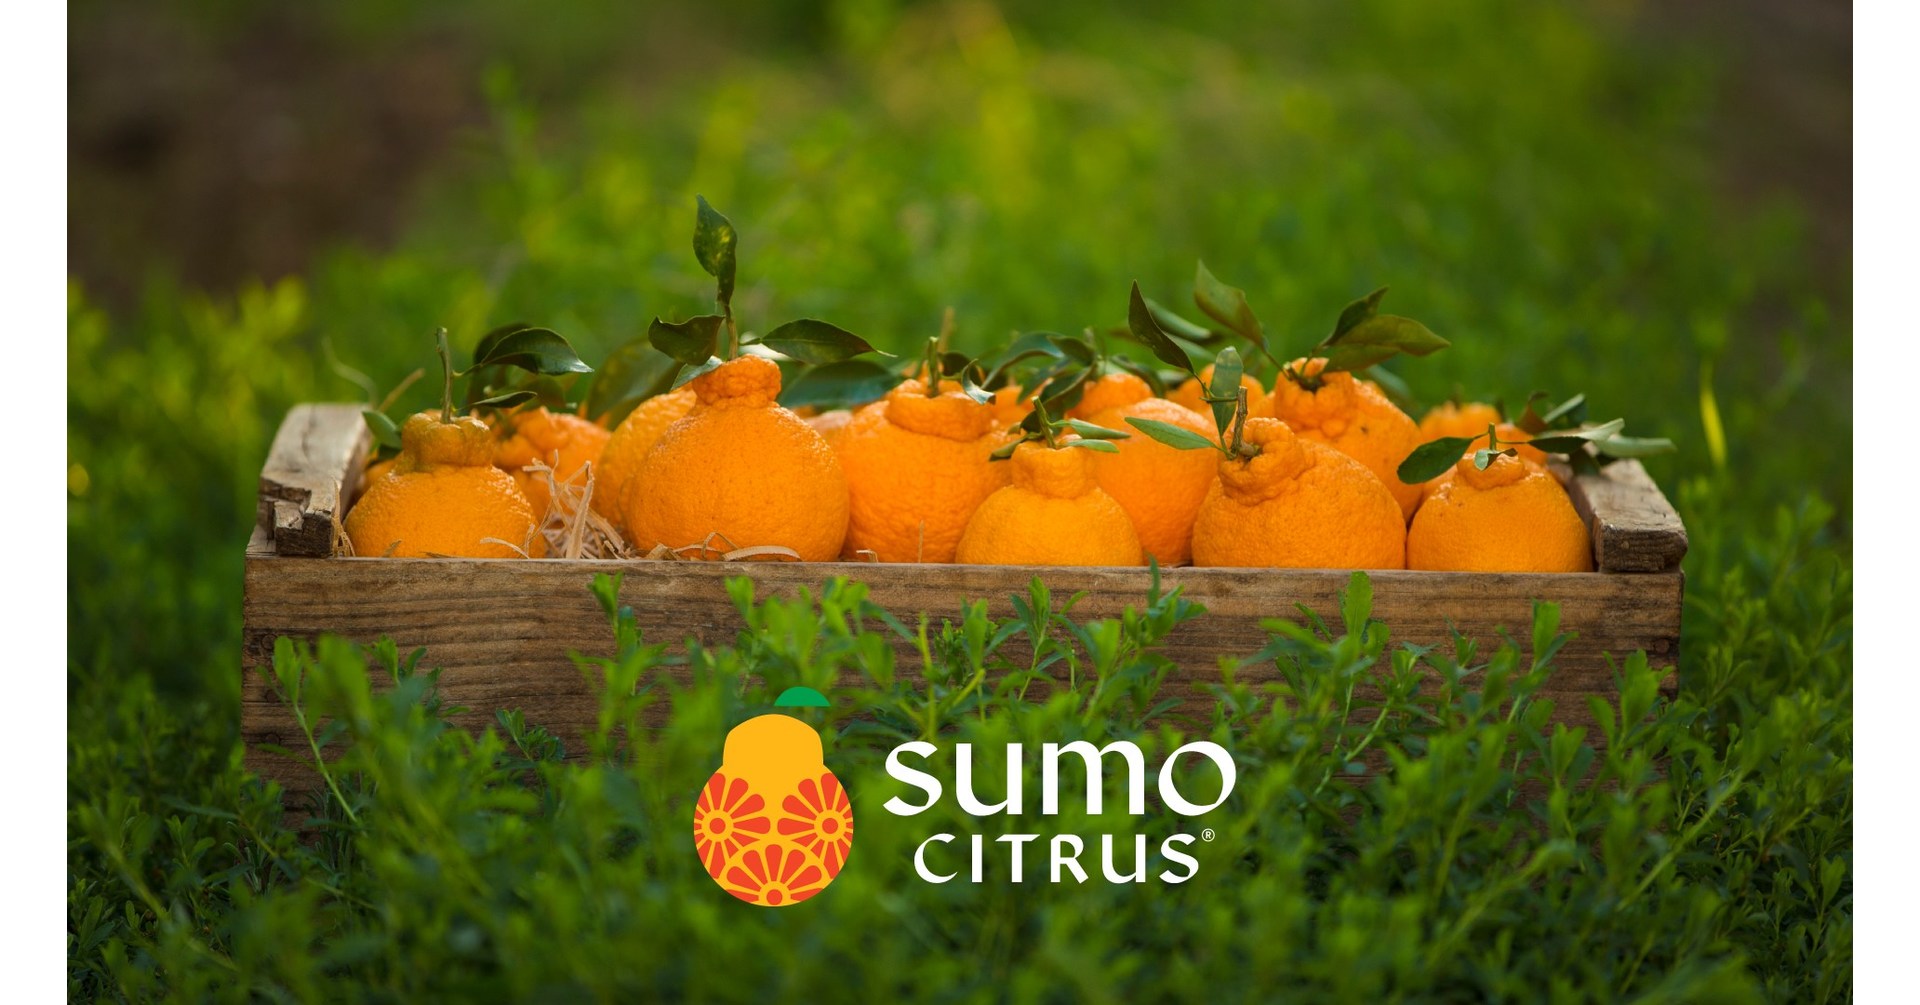 Sumo citrus is new to us, but it is a - WNC Farmers Market